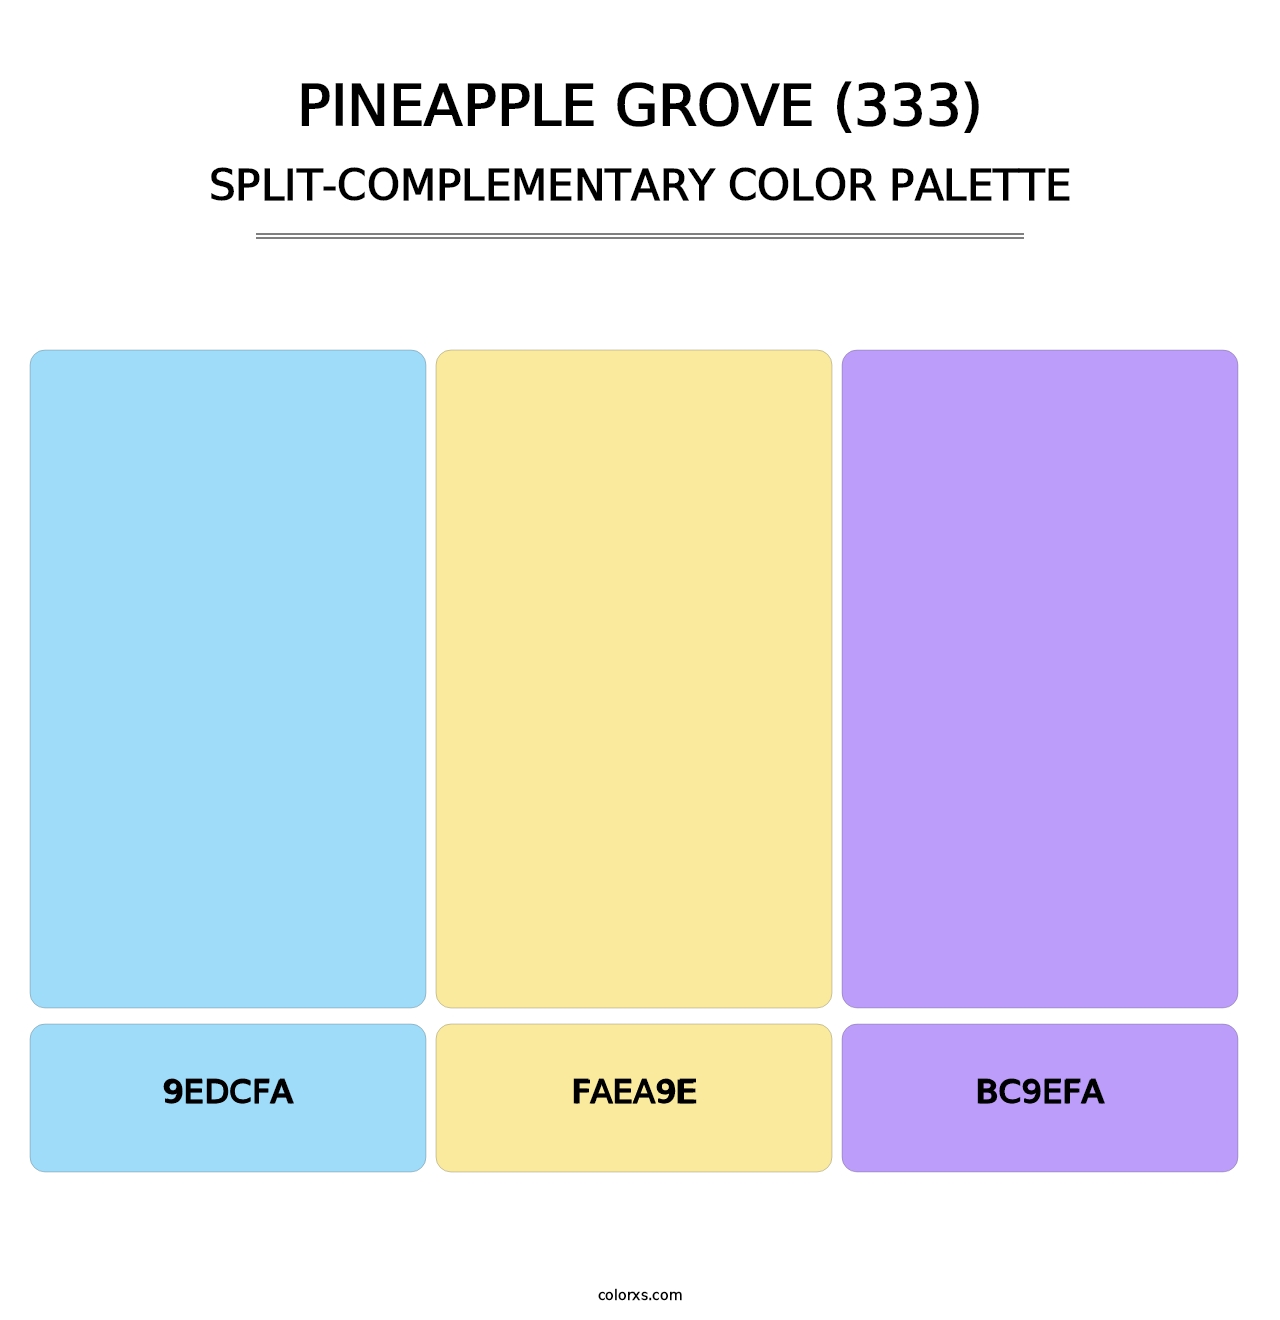 Pineapple Grove (333) - Split-Complementary Color Palette